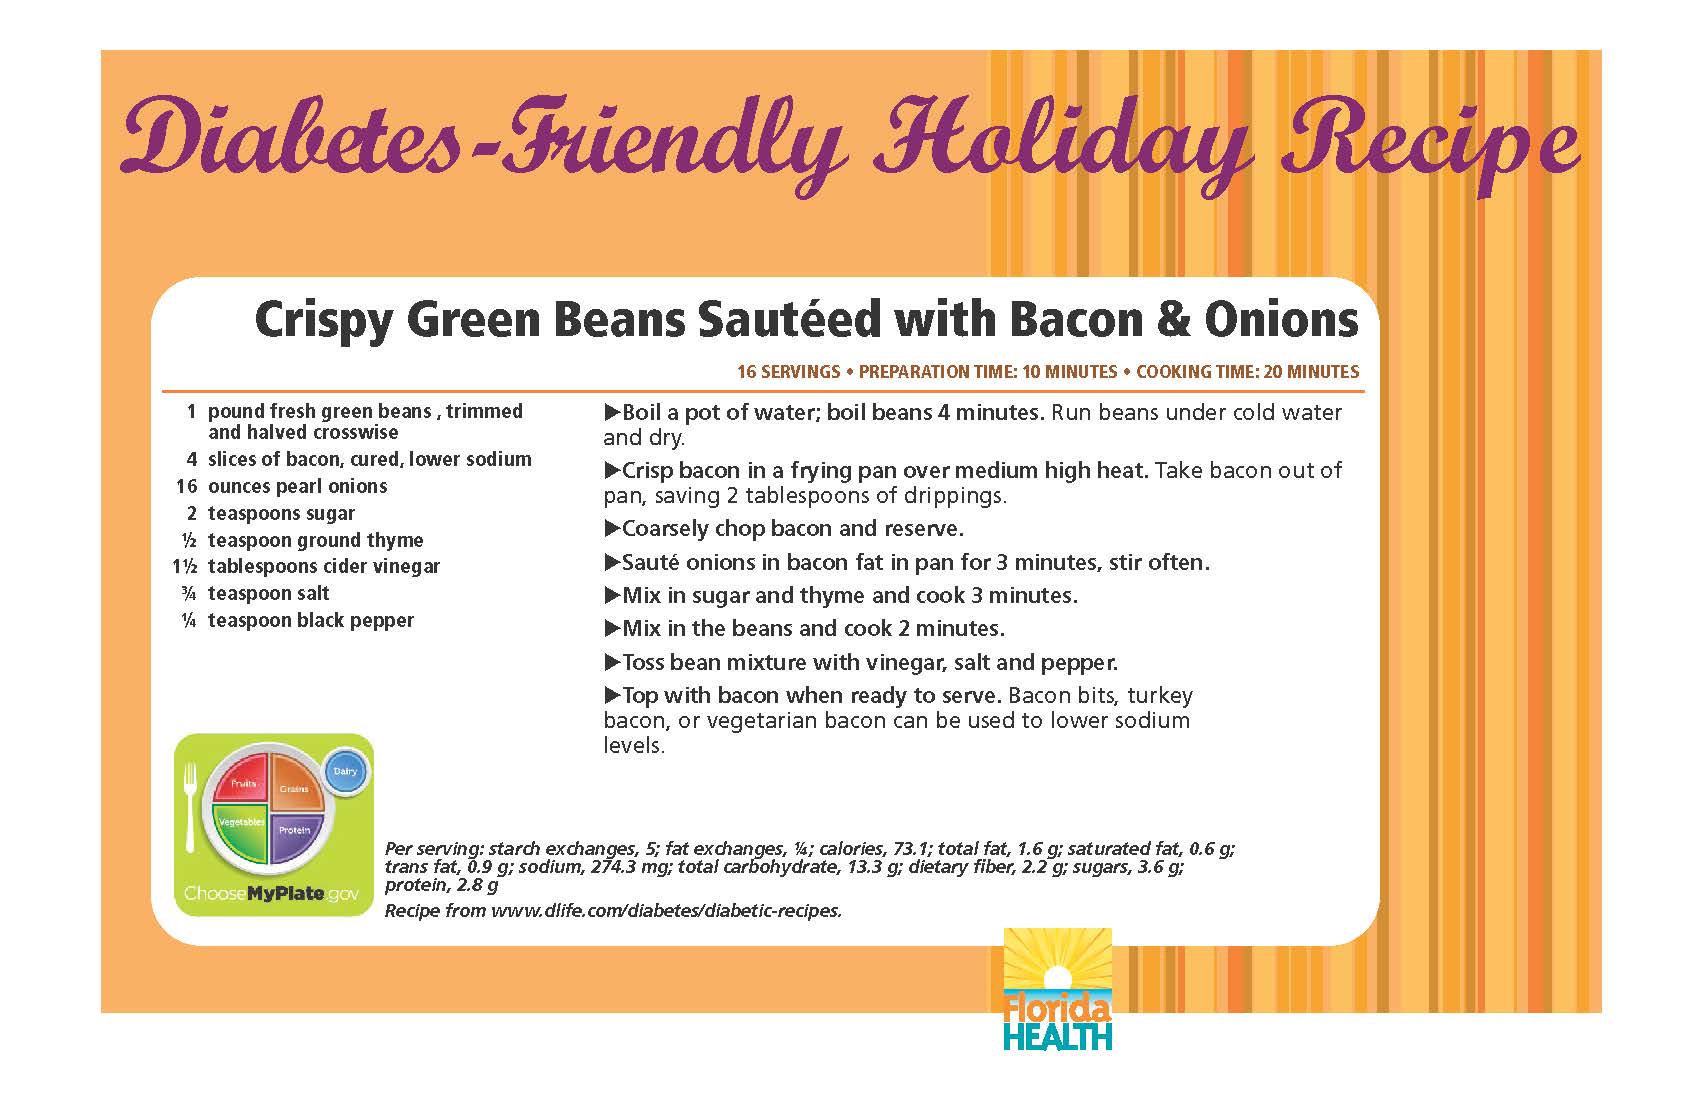 Diabetes-Friendly Holiday Recipe Crispy Green Beans Sautéed with Bacon & Onions 16 servings • preparation time: 10 minutes • cooking time: 20 minutes 1 pound fresh green beans , trimmed and halved crosswise 4 slices of bacon, cured, lower sodium 16 ounces pearl onions 2 teaspoons sugar ½ teaspoon ground thyme 1½ tablespoons cider vinegar ¾ teaspoon salt ¼ teaspoon black pepper Crispy Green Beans Sautéed with Bacon & Onions 16 servings • preparation time: 10 minutes • cooking time: 20 minutes Boil a pot of water; boil beans 4 minutes. Run beans under cold water and dry. Crisp bacon in a frying pan over medium high heat. Take bacon out of pan, saving 2 tablespoons of drippings. Coarsely chop bacon and reserve. Sauté onions in bacon fat in pan for 3 minutes, stir often. Mix in sugar and thyme and cook 3 minutes. Mix in the beans and cook 2 minutes. Toss bean mixture with vinegar, salt and pepper. Top with bacon when ready to serve. Bacon bits, turkey bacon, or vegetarian bacon can be used to lower sodium levels. Per serving: starch exchanges, 5; fat exchanges, ¼; calories, 73.1; total fat, 1.6 g; saturated fat, 0.6 g; trans fat, 0.9 g; sodium, 274.3 mg; total carbohydrate, 13.3 g; dietary fiber, 2.2 g; sugars, 3.6 g; protein, 2.8 g Recipe from www.dlife.com/diabetes/diabetic-recipes.